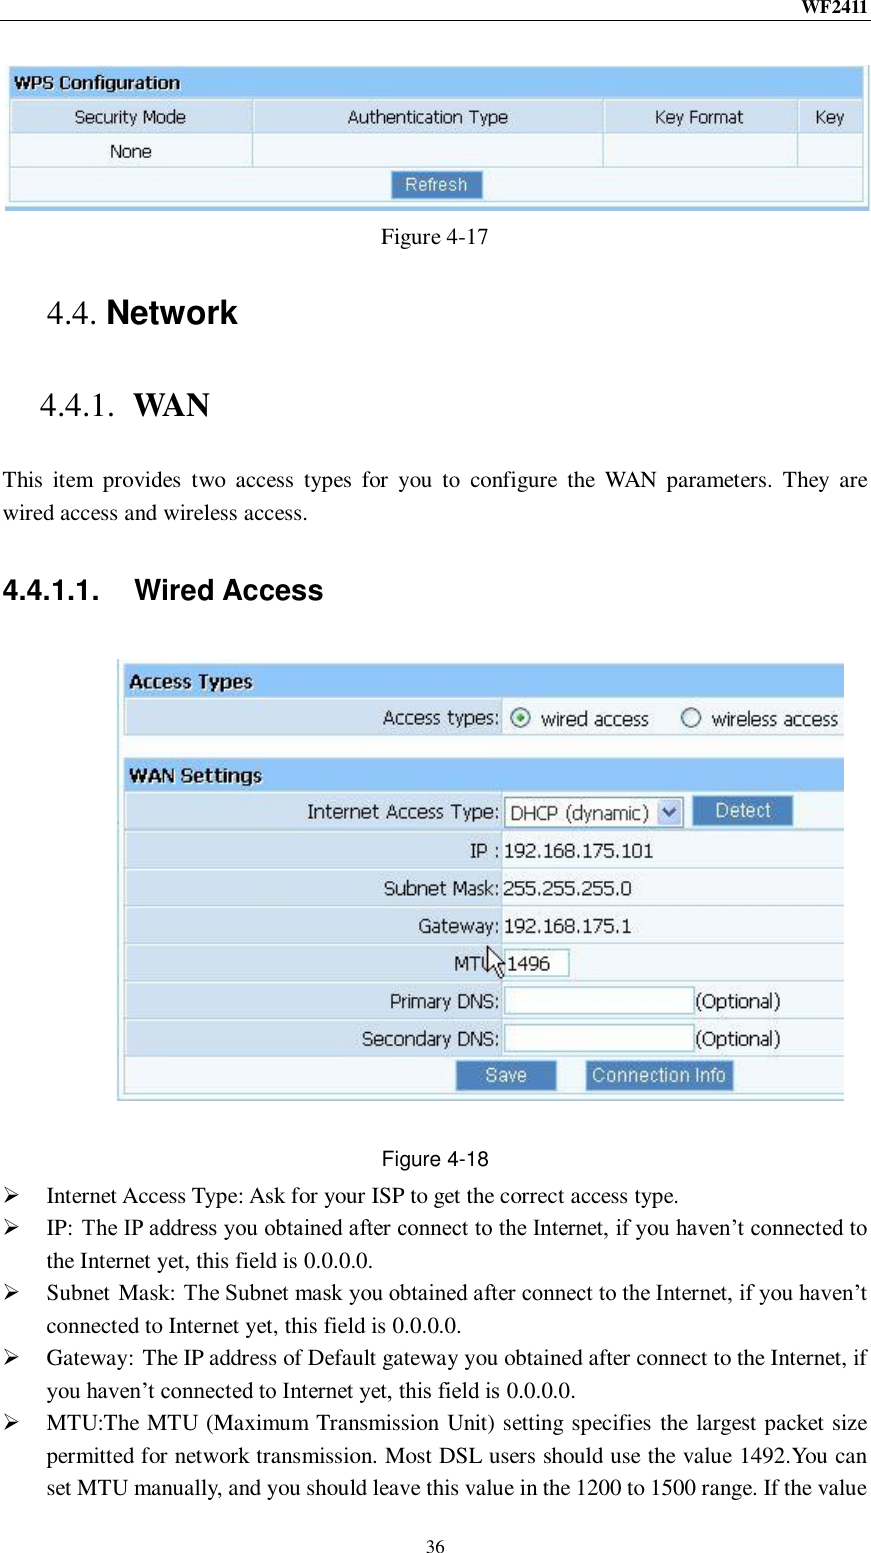 WF2411  36  Figure 4-17 4.4. Network 4.4.1. WAN This  item  provides  two  access  types  for  you  to  configure  the  WAN  parameters.  They  are wired access and wireless access. 4.4.1.1.  Wired Access  Figure 4-18  Internet Access Type: Ask for your ISP to get the correct access type.  IP: The IP address you obtained after connect to the Internet, if you haven‟t connected to the Internet yet, this field is 0.0.0.0.  Subnet Mask: The Subnet mask you obtained after connect to the Internet, if you haven‟t connected to Internet yet, this field is 0.0.0.0.  Gateway: The IP address of Default gateway you obtained after connect to the Internet, if you haven‟t connected to Internet yet, this field is 0.0.0.0.  MTU:The MTU (Maximum Transmission Unit) setting specifies the largest packet size permitted for network transmission. Most DSL users should use the value 1492.You can set MTU manually, and you should leave this value in the 1200 to 1500 range. If the value 